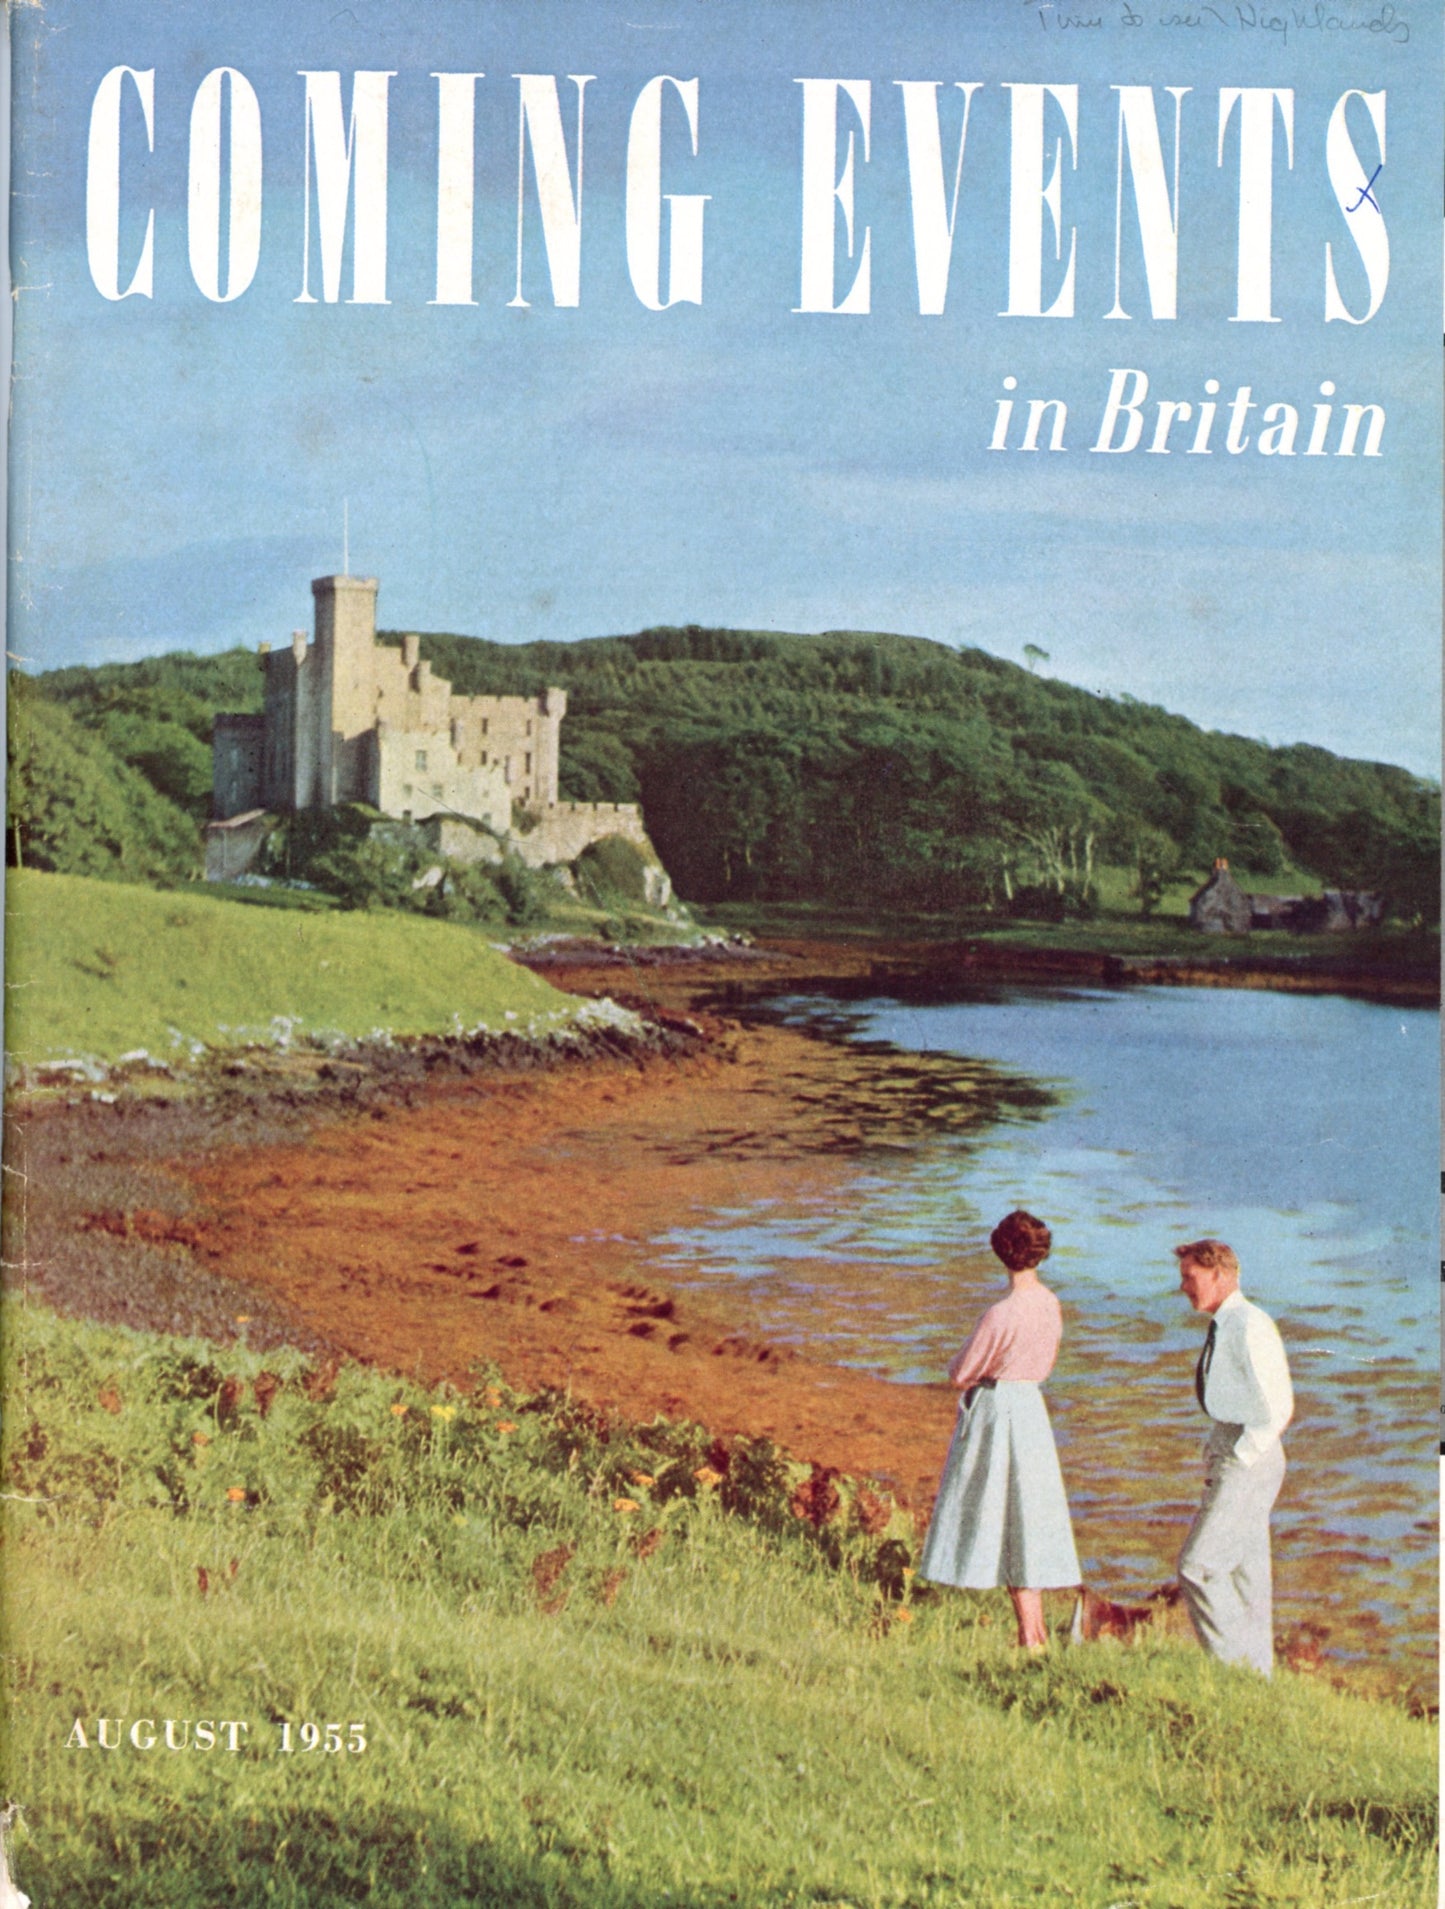 COMING EVENTS IN BRITAIN Vintage Travel Magazine © August 1955